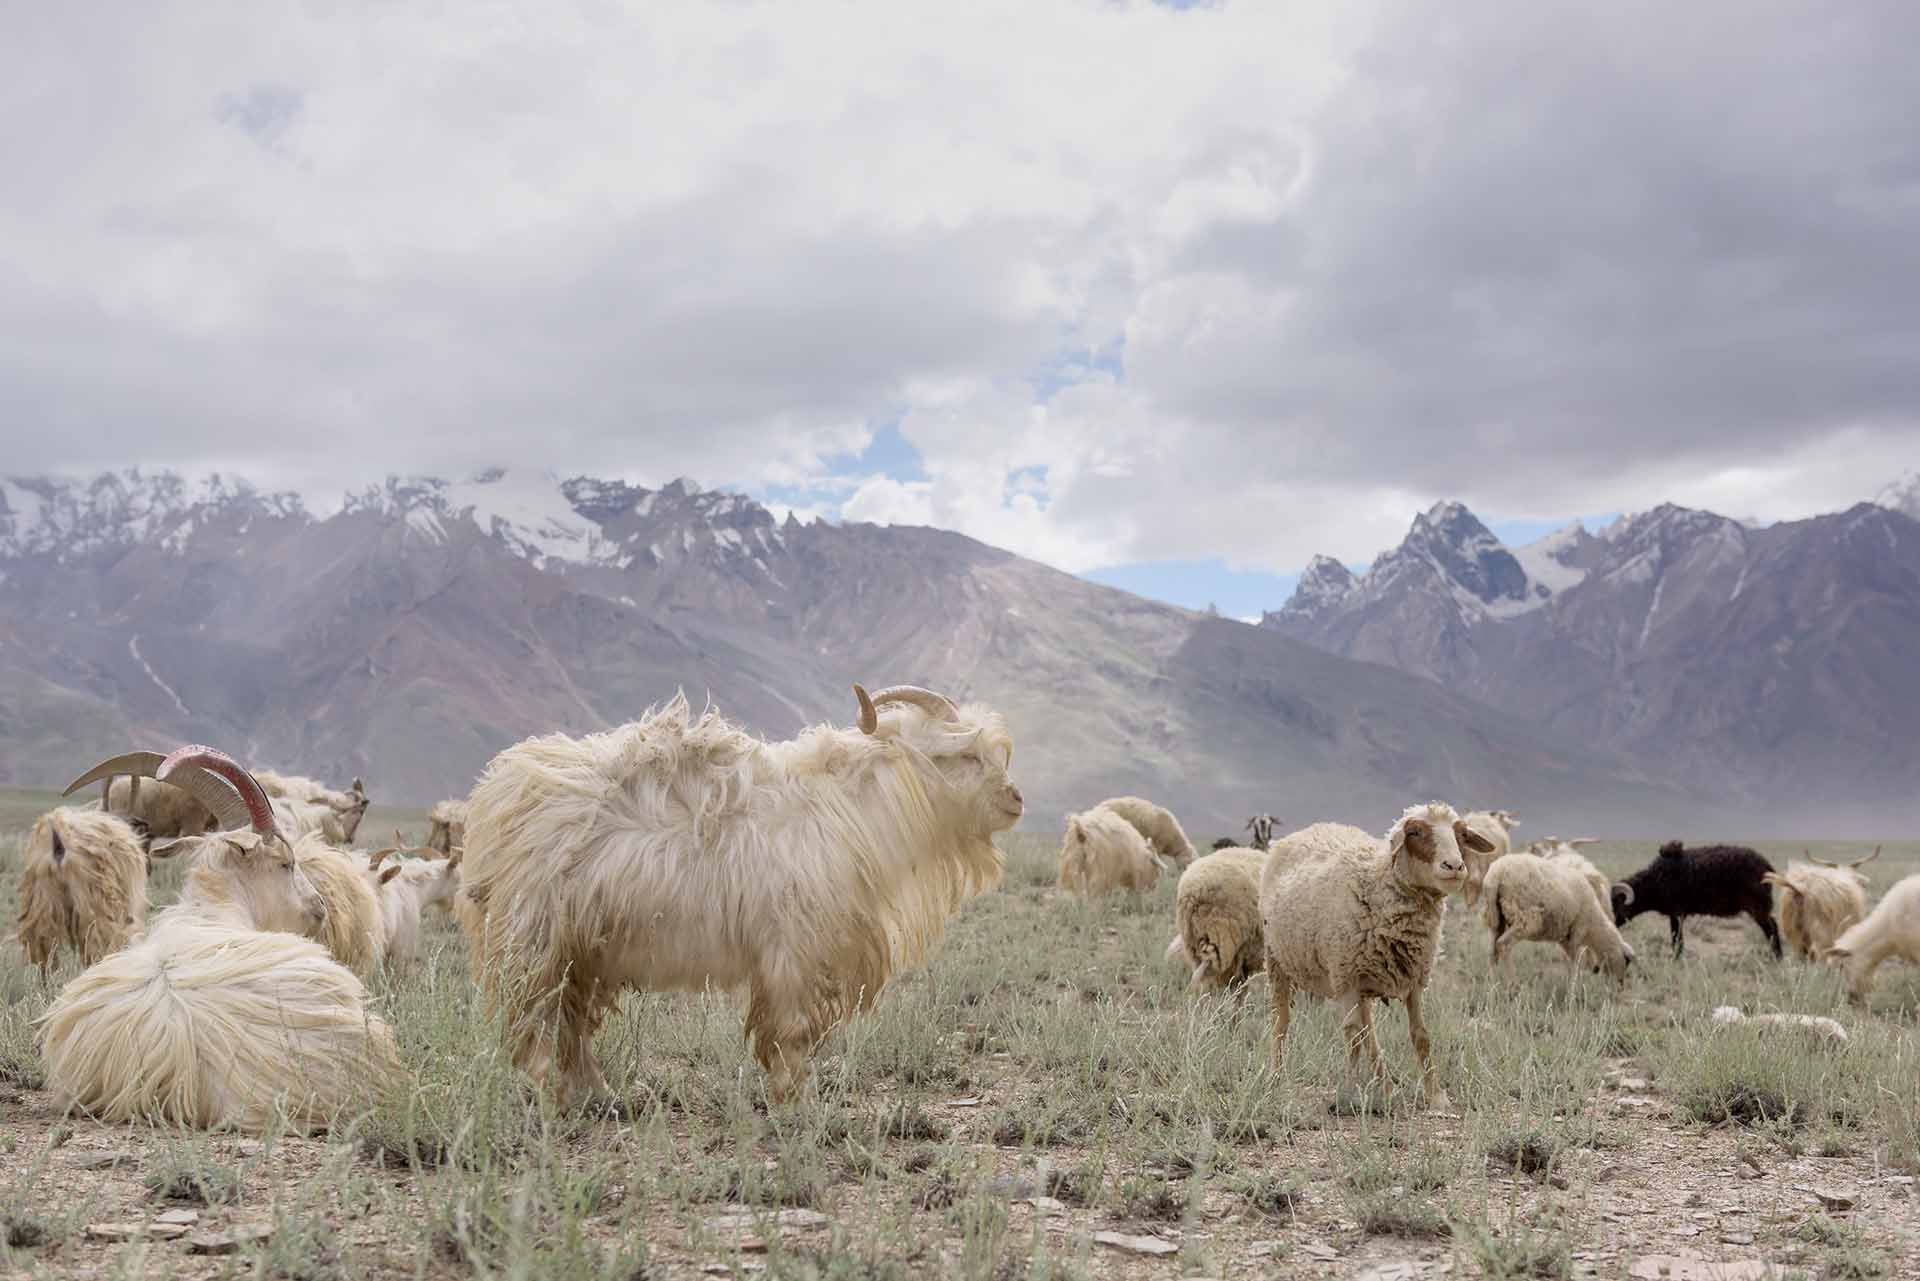 Kashmir goats in beautiful India landscape with snow peaks background.